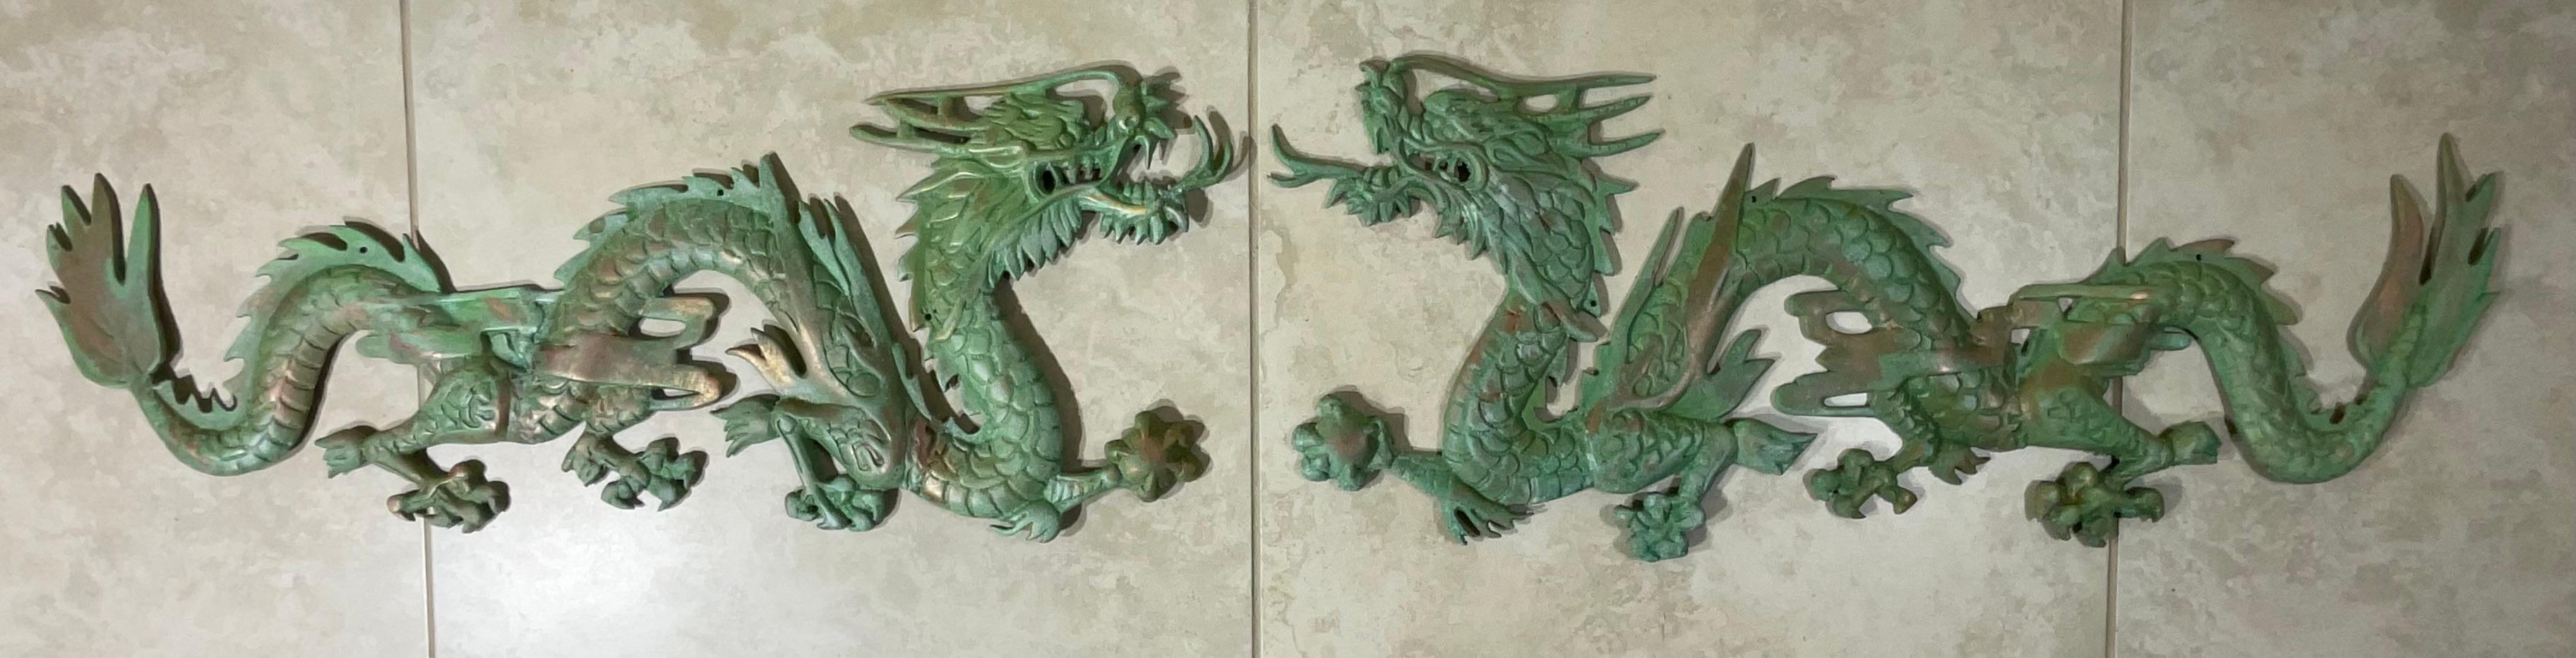 Beautiful pair of wall hanging made of solid brass depicting detailed ancient Chinese dragon.
Nice oxidise patina, decorative wall hanging.
Exceptional object of art for wall display.